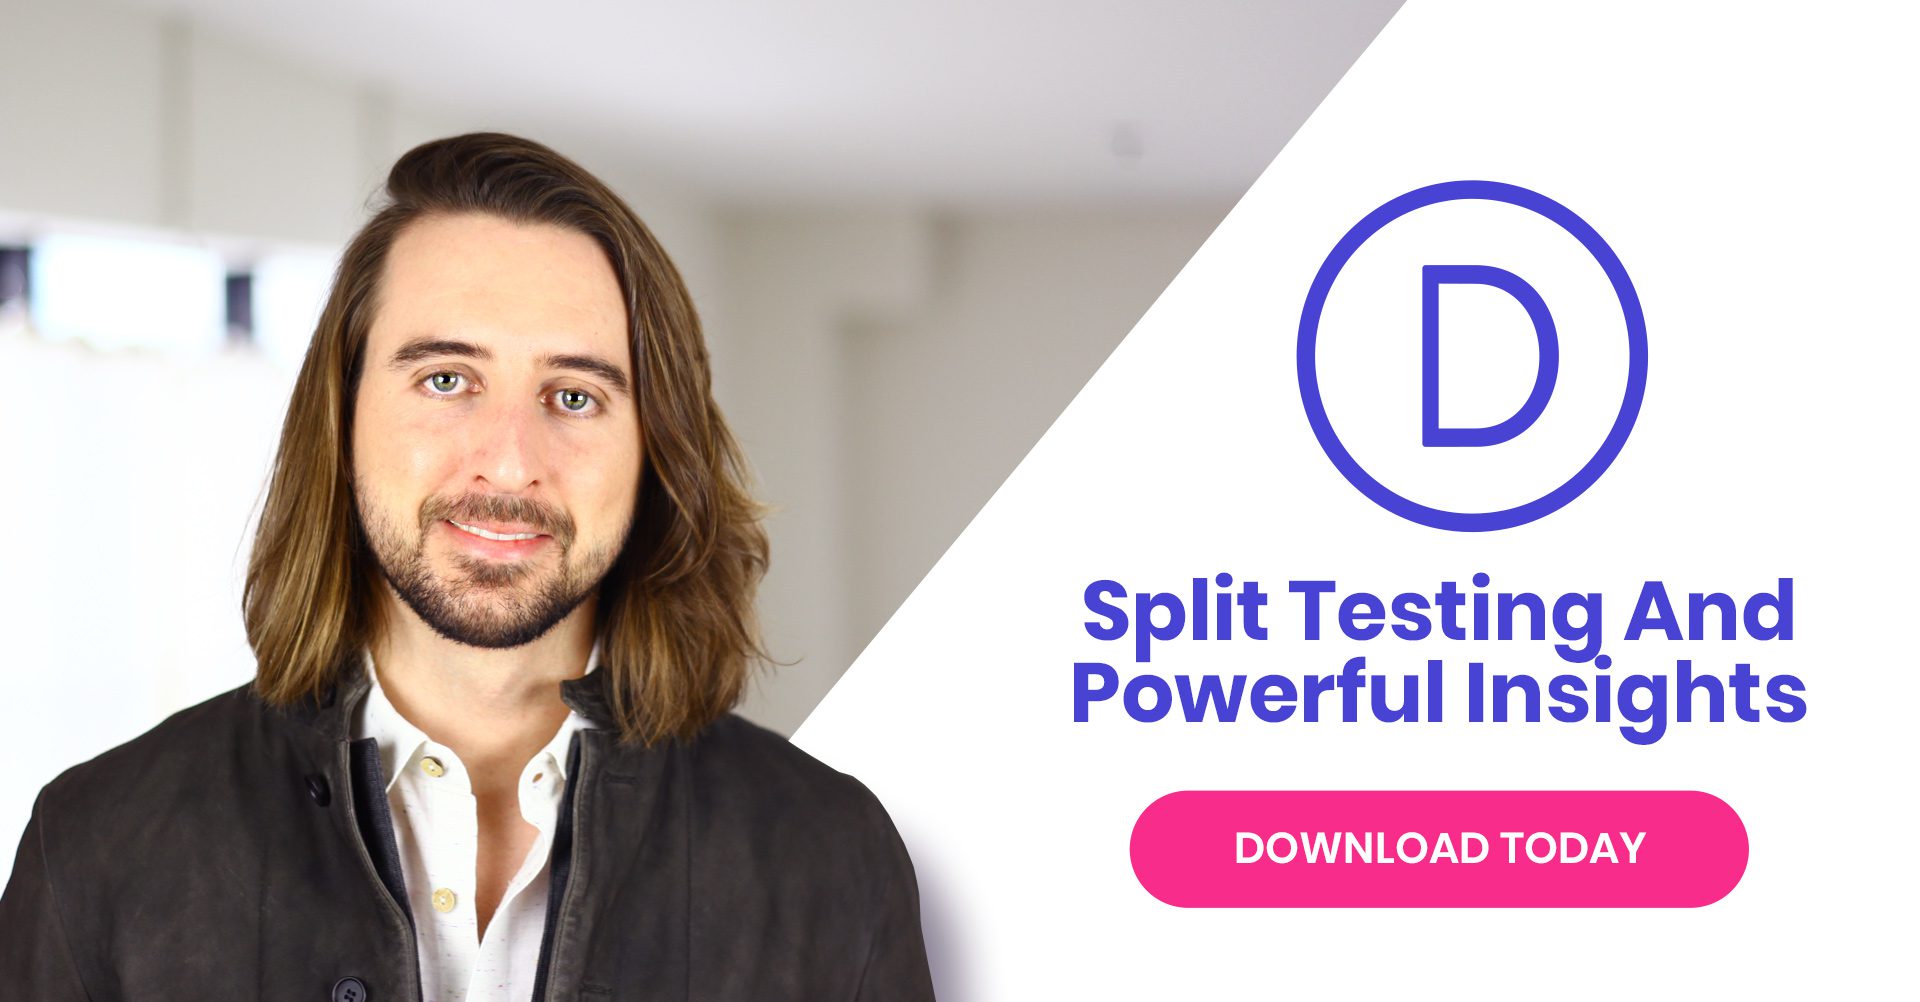 Divi Feature Update! Introducing Split Testing And Powerful Insights For The Visual Builder